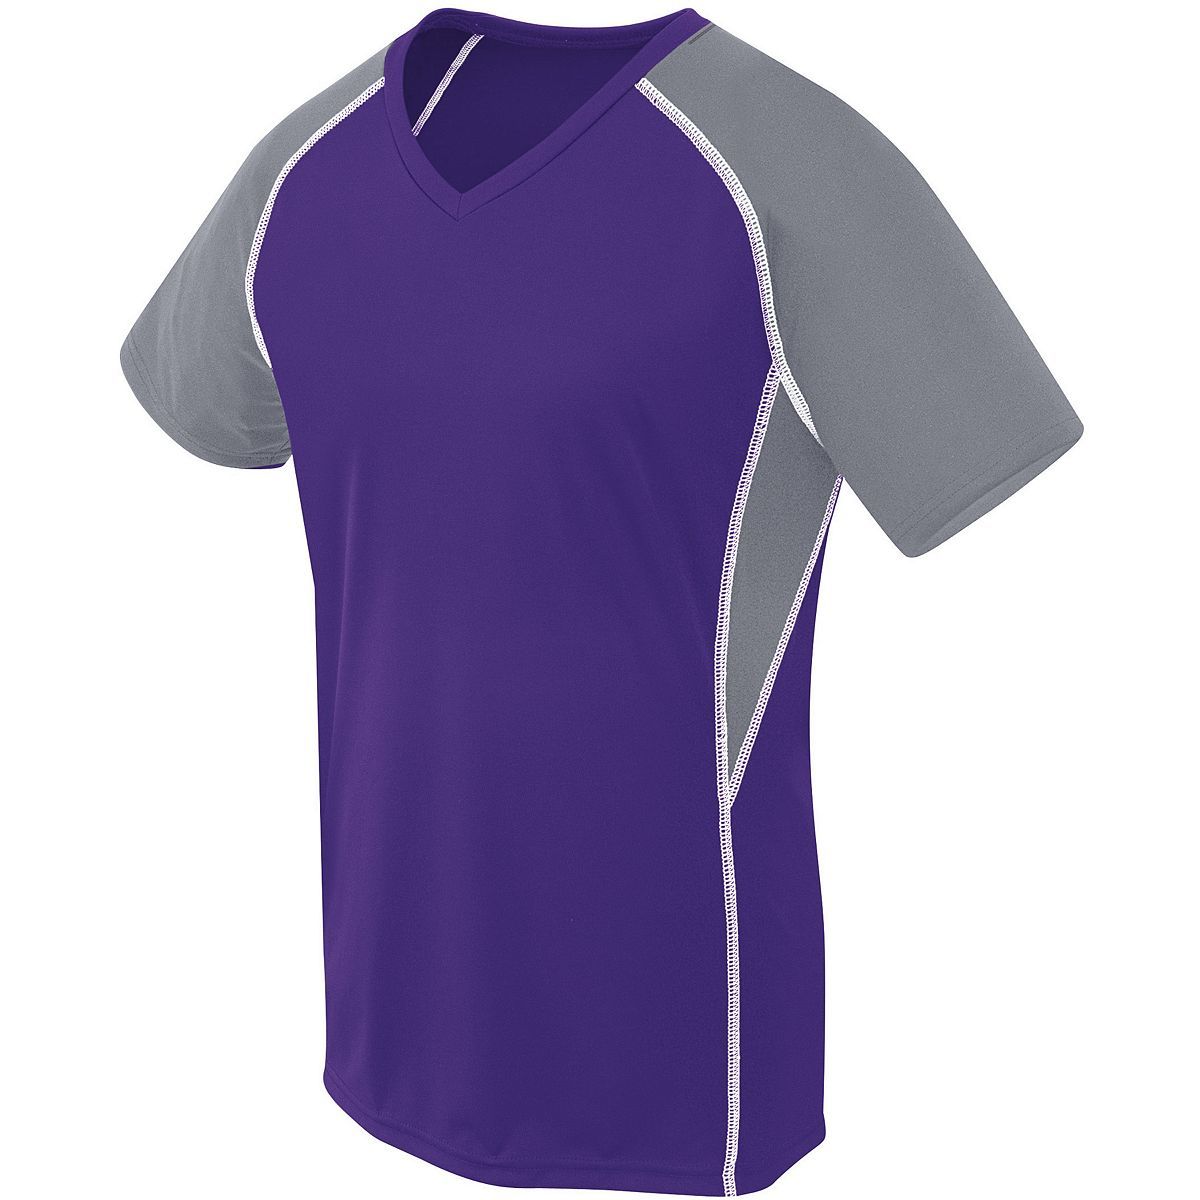 High 5 Girls Evolution Short Sleeve in Purple/Graphite/White  -Part of the Girls, High5-Products, Shirts product lines at KanaleyCreations.com